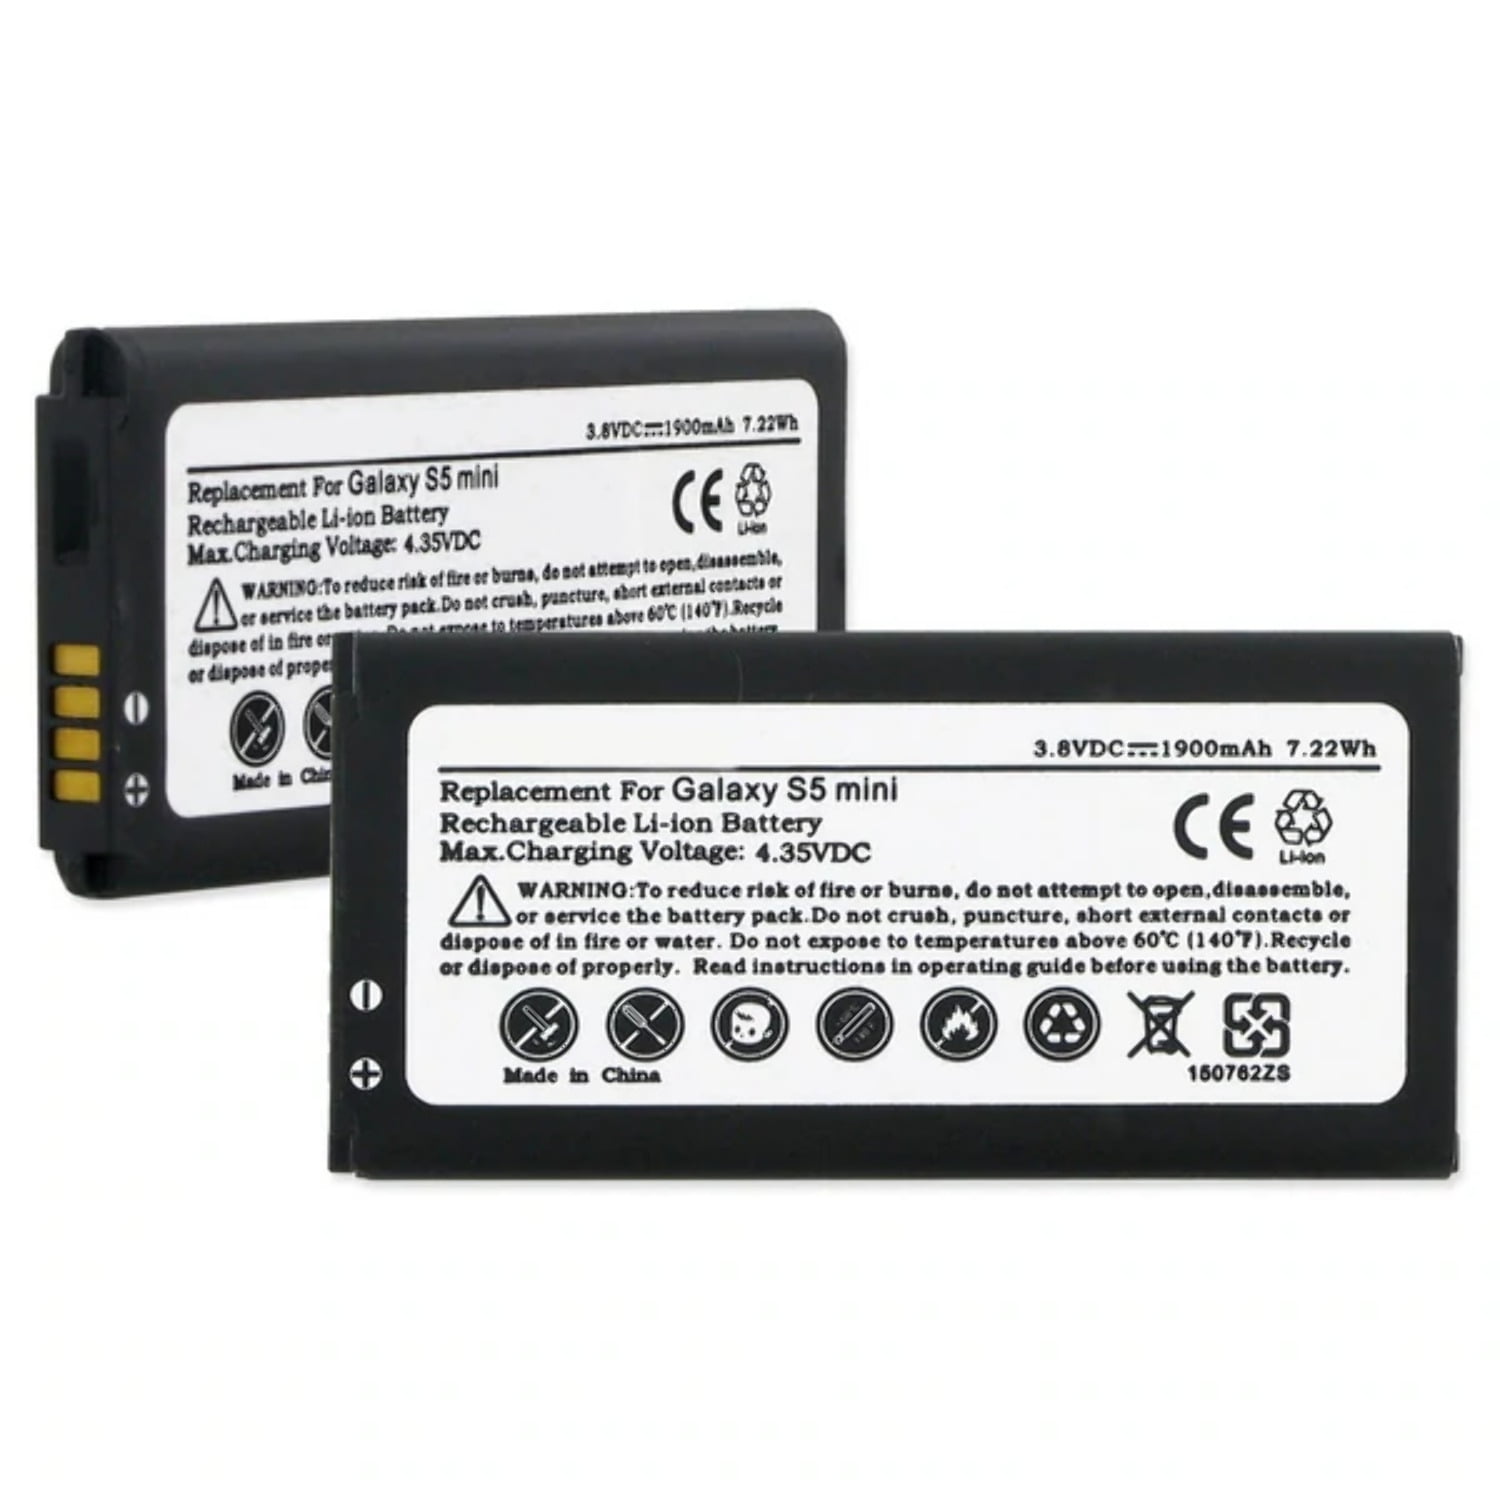 Cell battery. S 5 Mini Battery. Replacement of Cell Phone Batteries. Lithium ion Battery Phone.